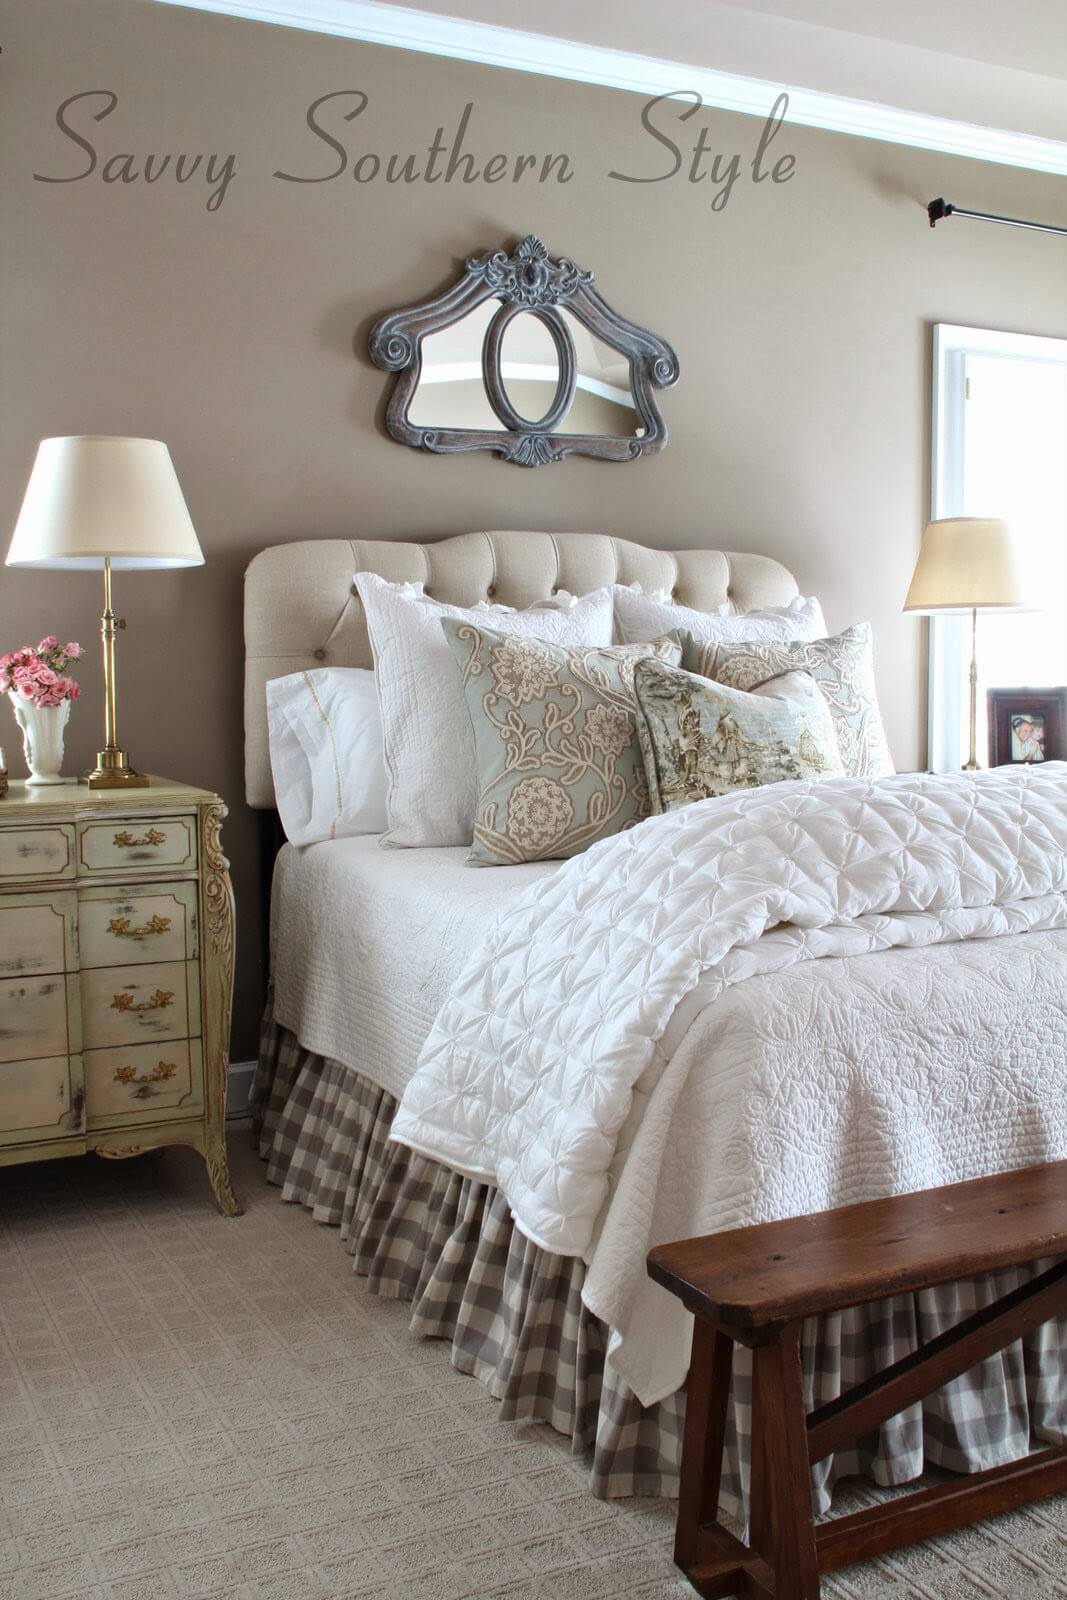 30 Best French Country Bedroom Decor and Design Ideas for 2020